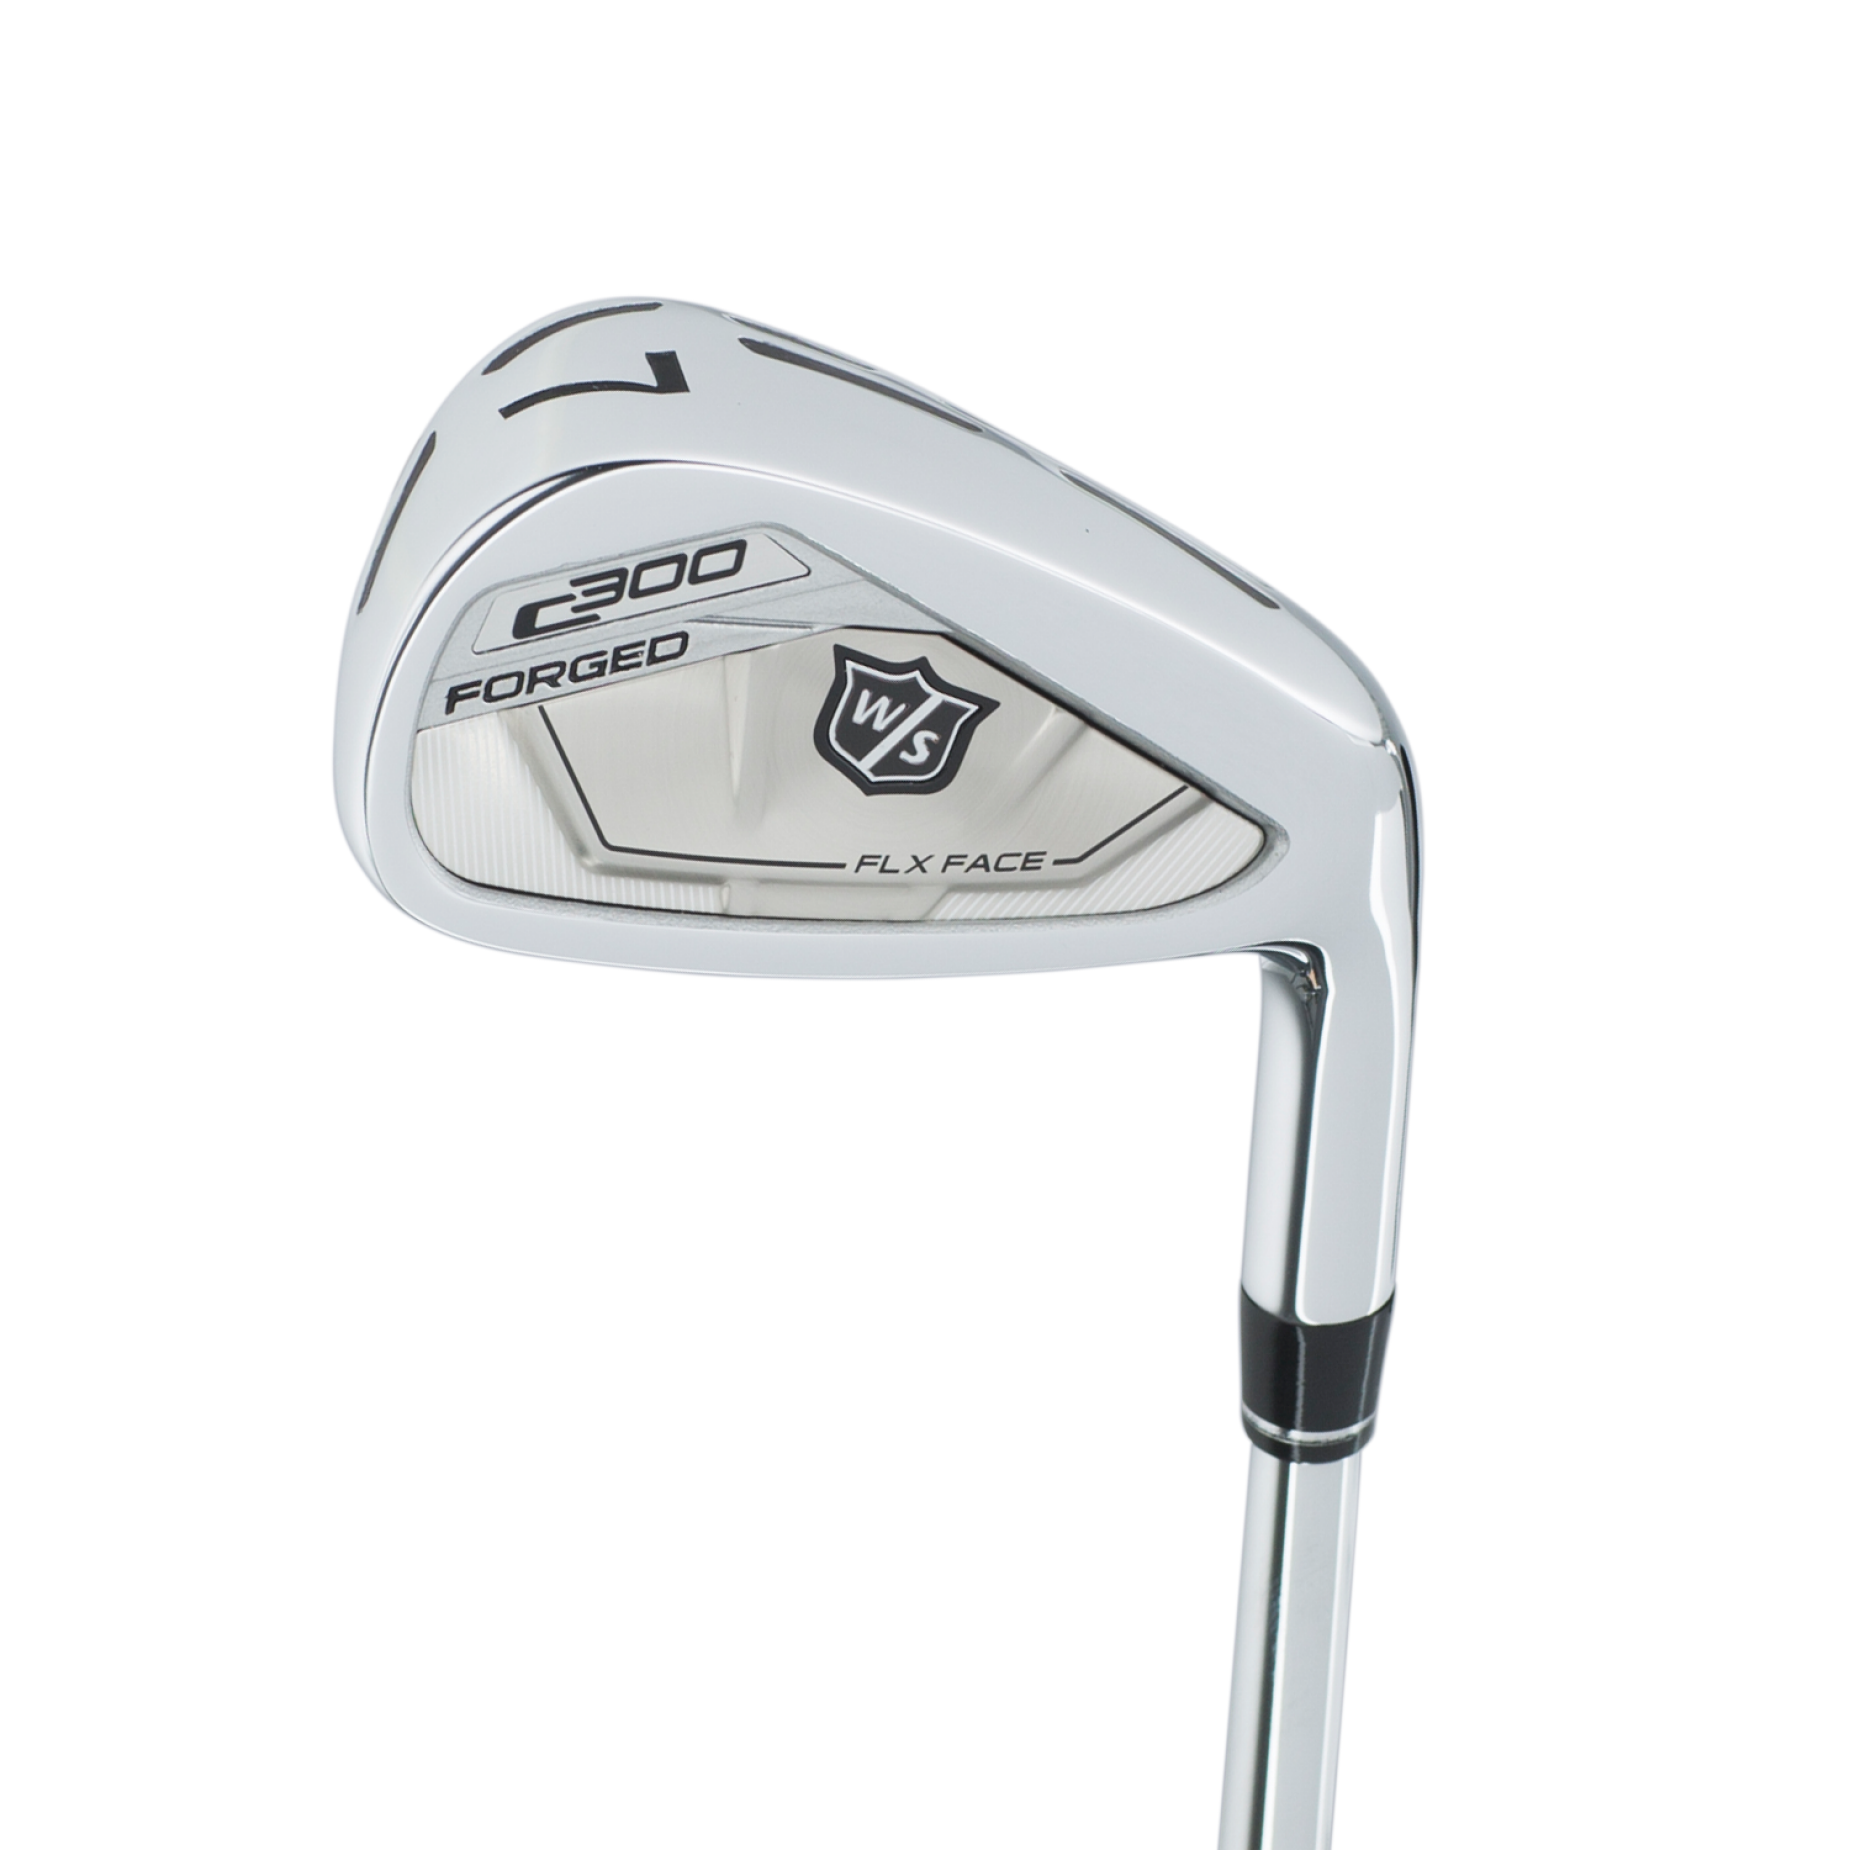 0318-PDI-Beauty-Wilson-C300-Forged.png